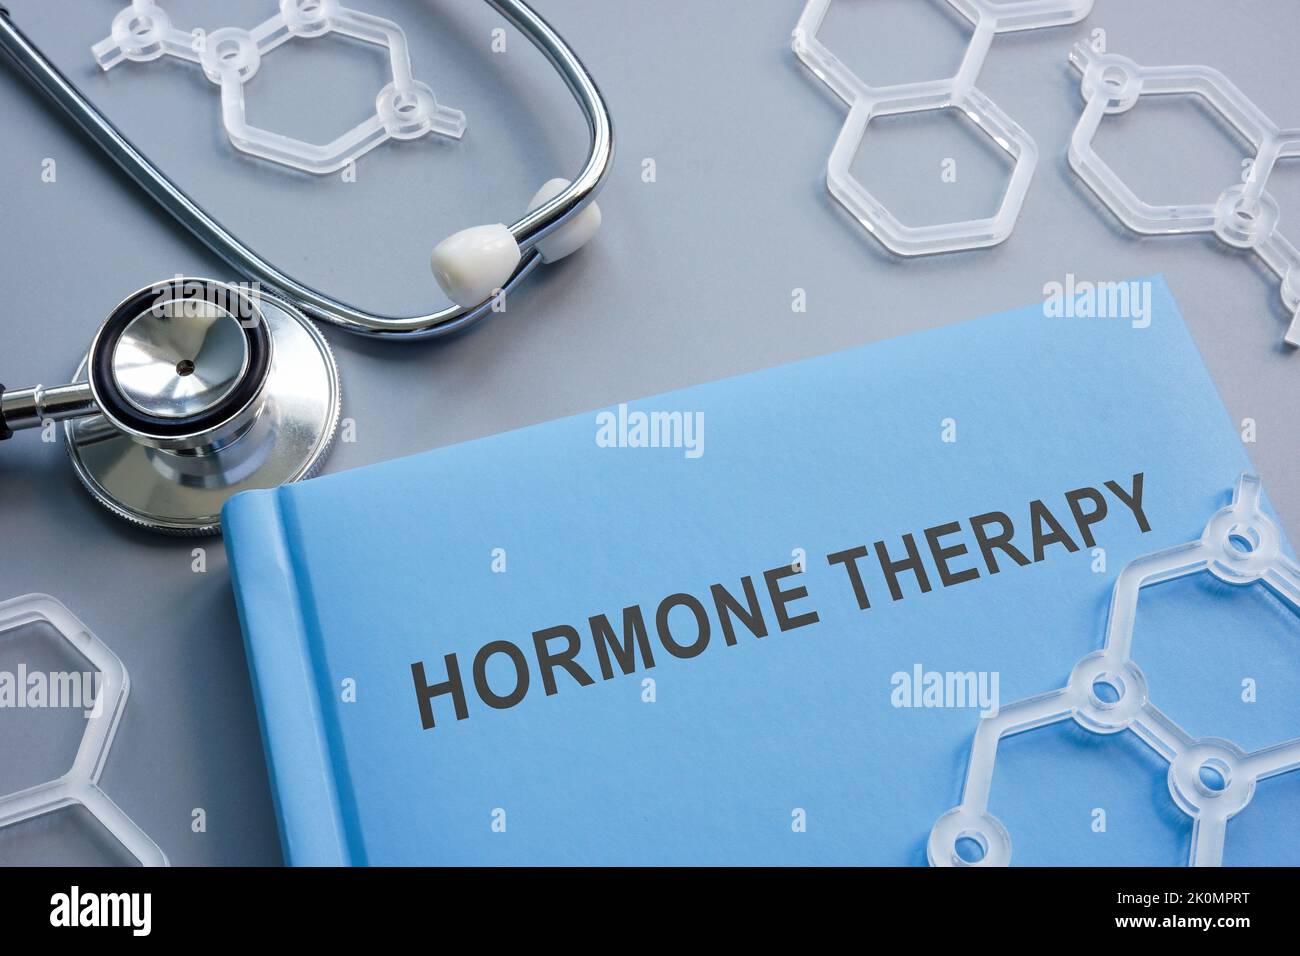 Book hormone therapy and plastic chemical models. Stock Photo